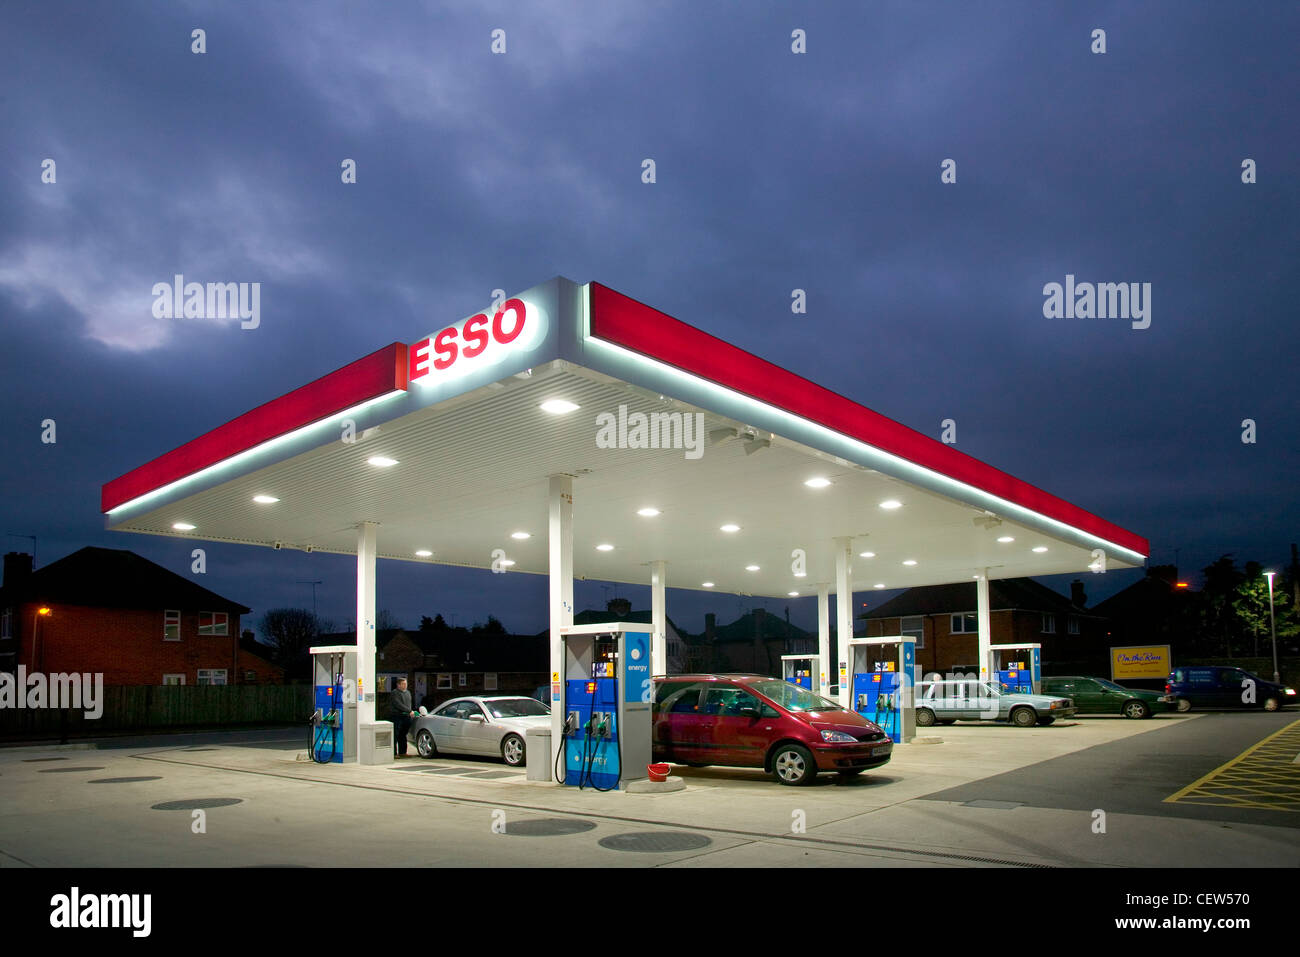 Esso garage forecourt at dusk with cars Stock Photo